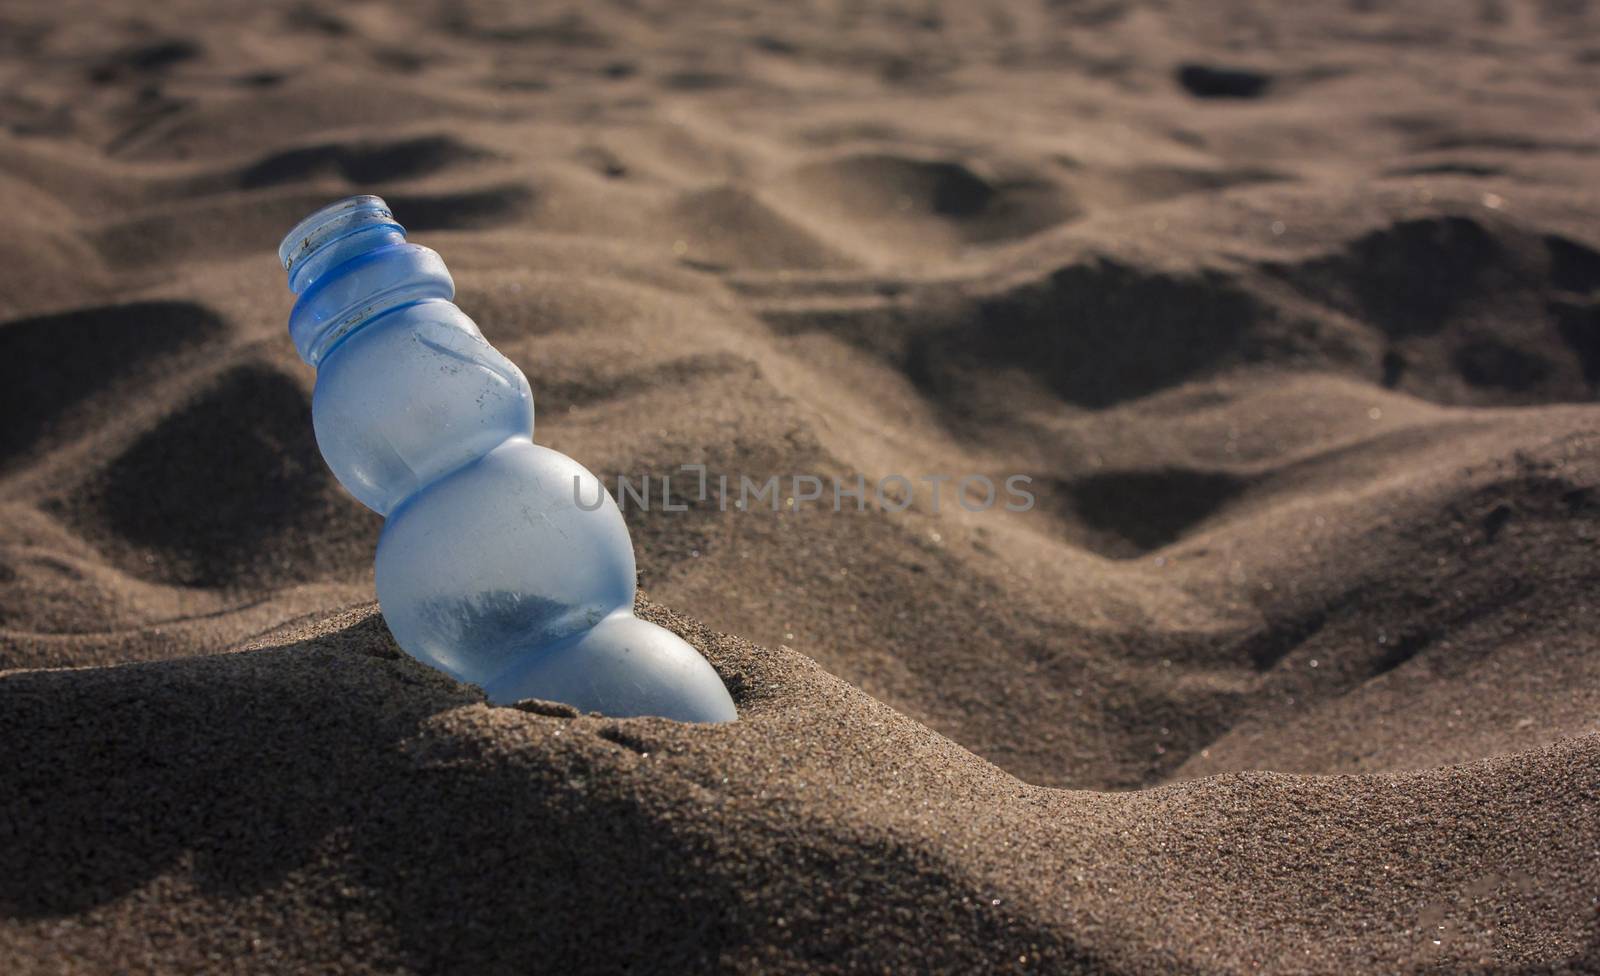 Waste on the sand of an Italian beach by pippocarlot